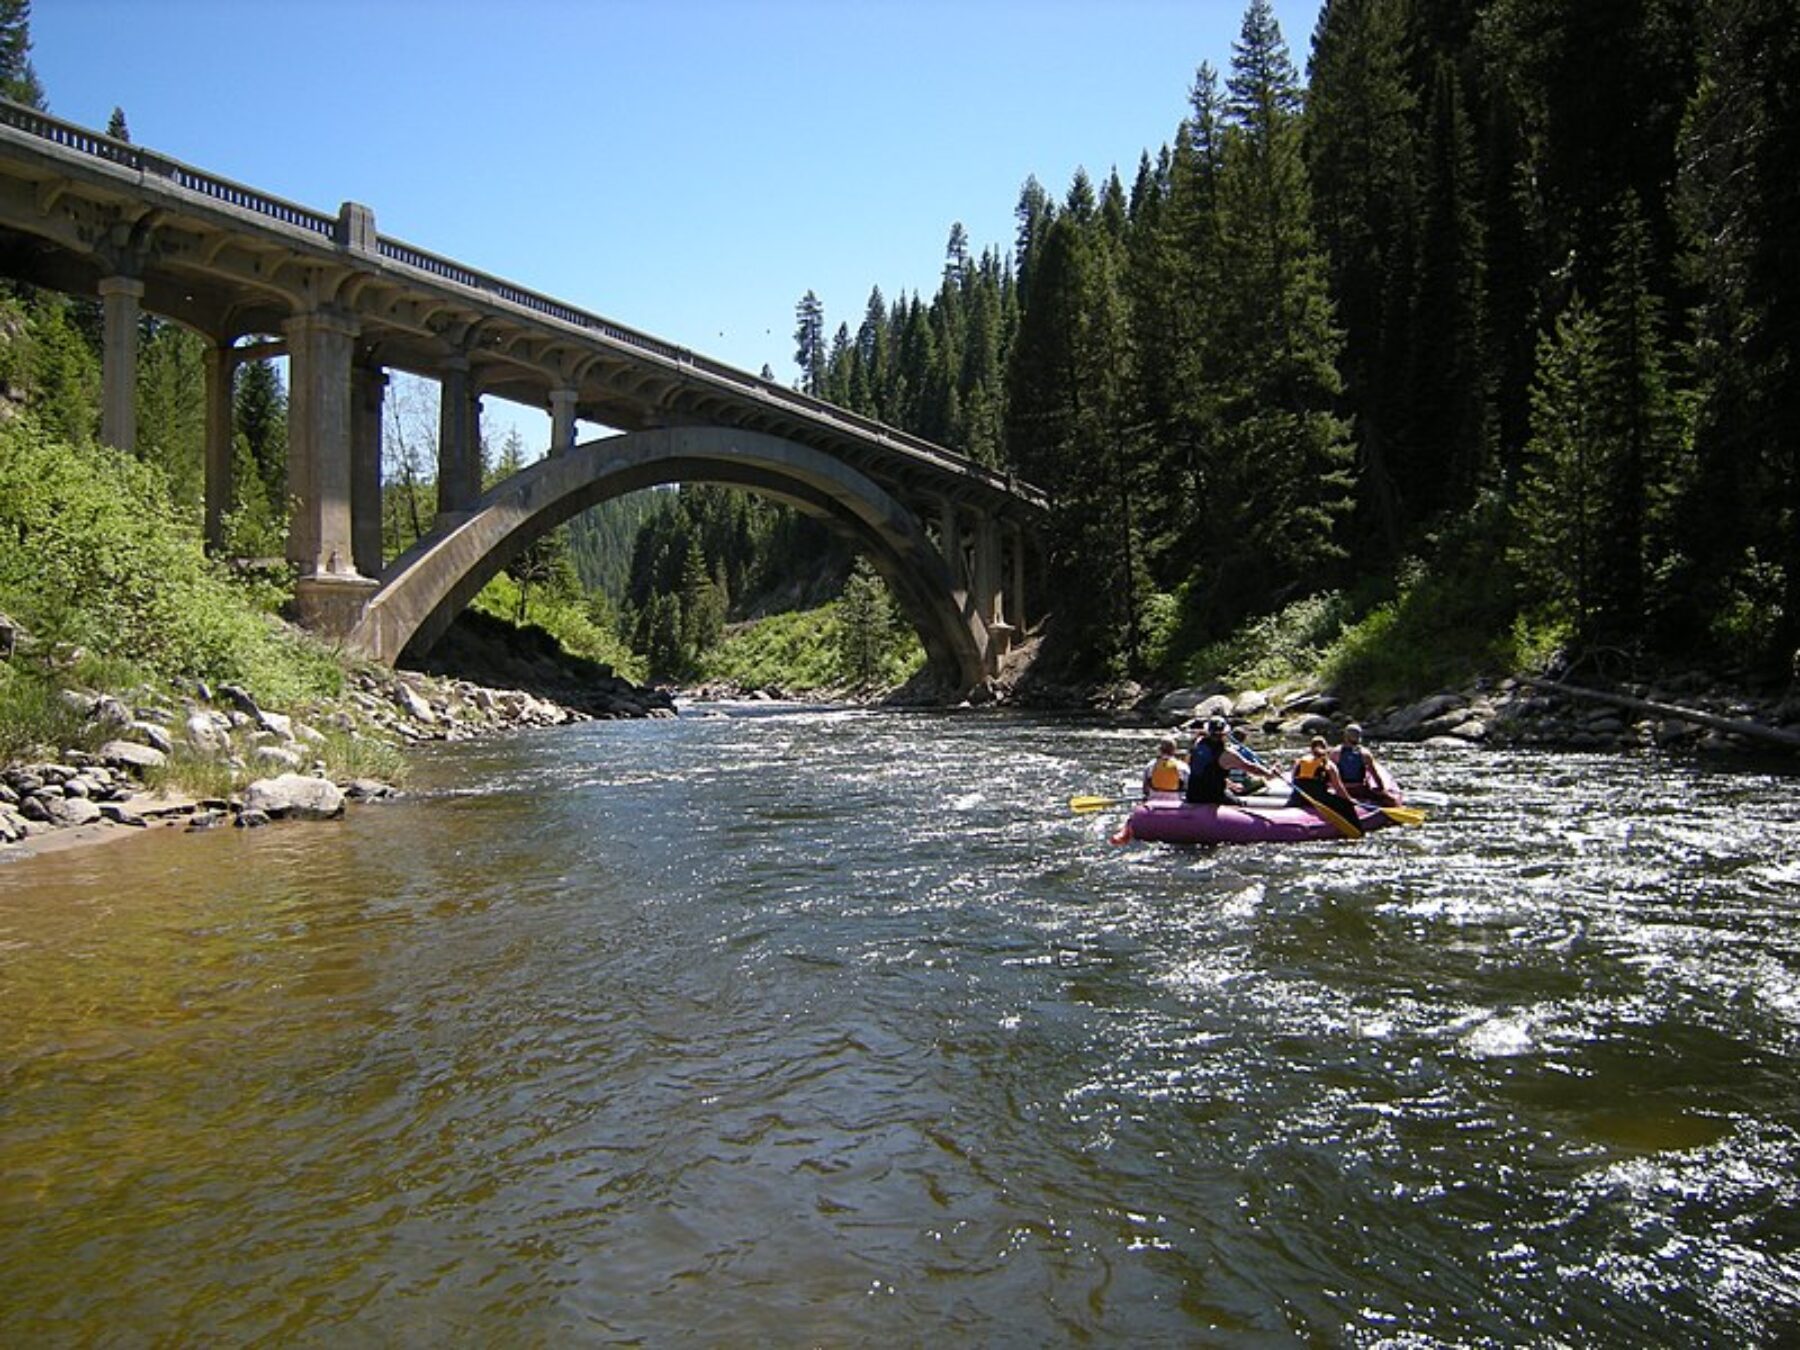 Five people of mixed genders and ages paddle a raft near Rainbow Bridge on the Payette River near North Fork Idaho with evergreen trees, shrubs, and large stones on the riverbank